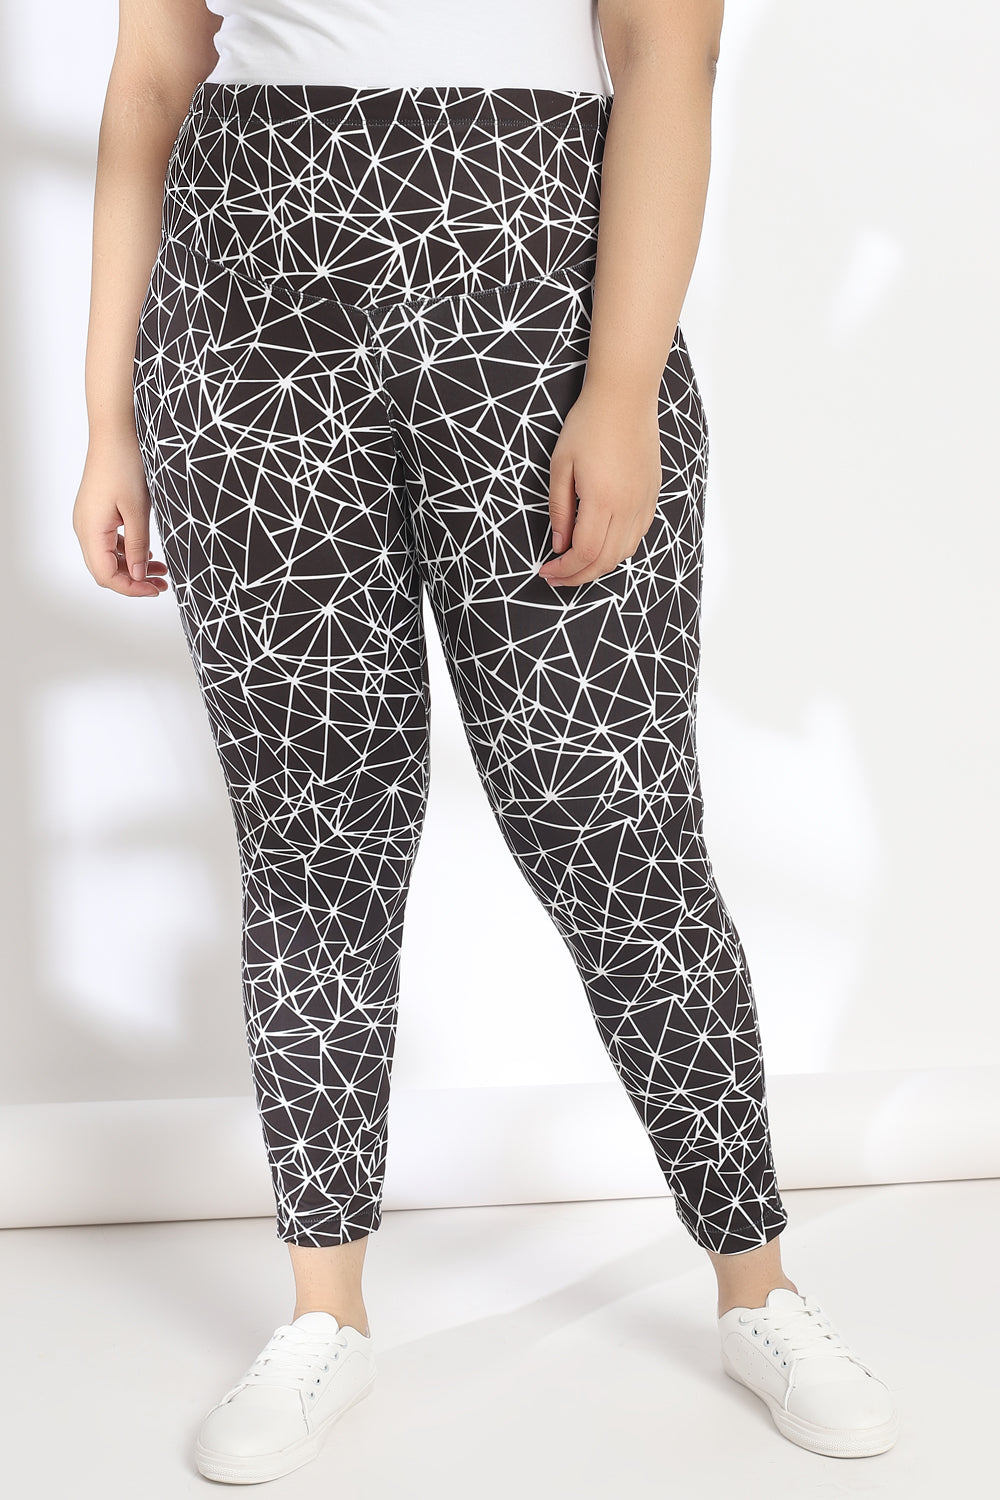 Plus Size Black Abstract Prism Tummy Shaper Printed Leggings